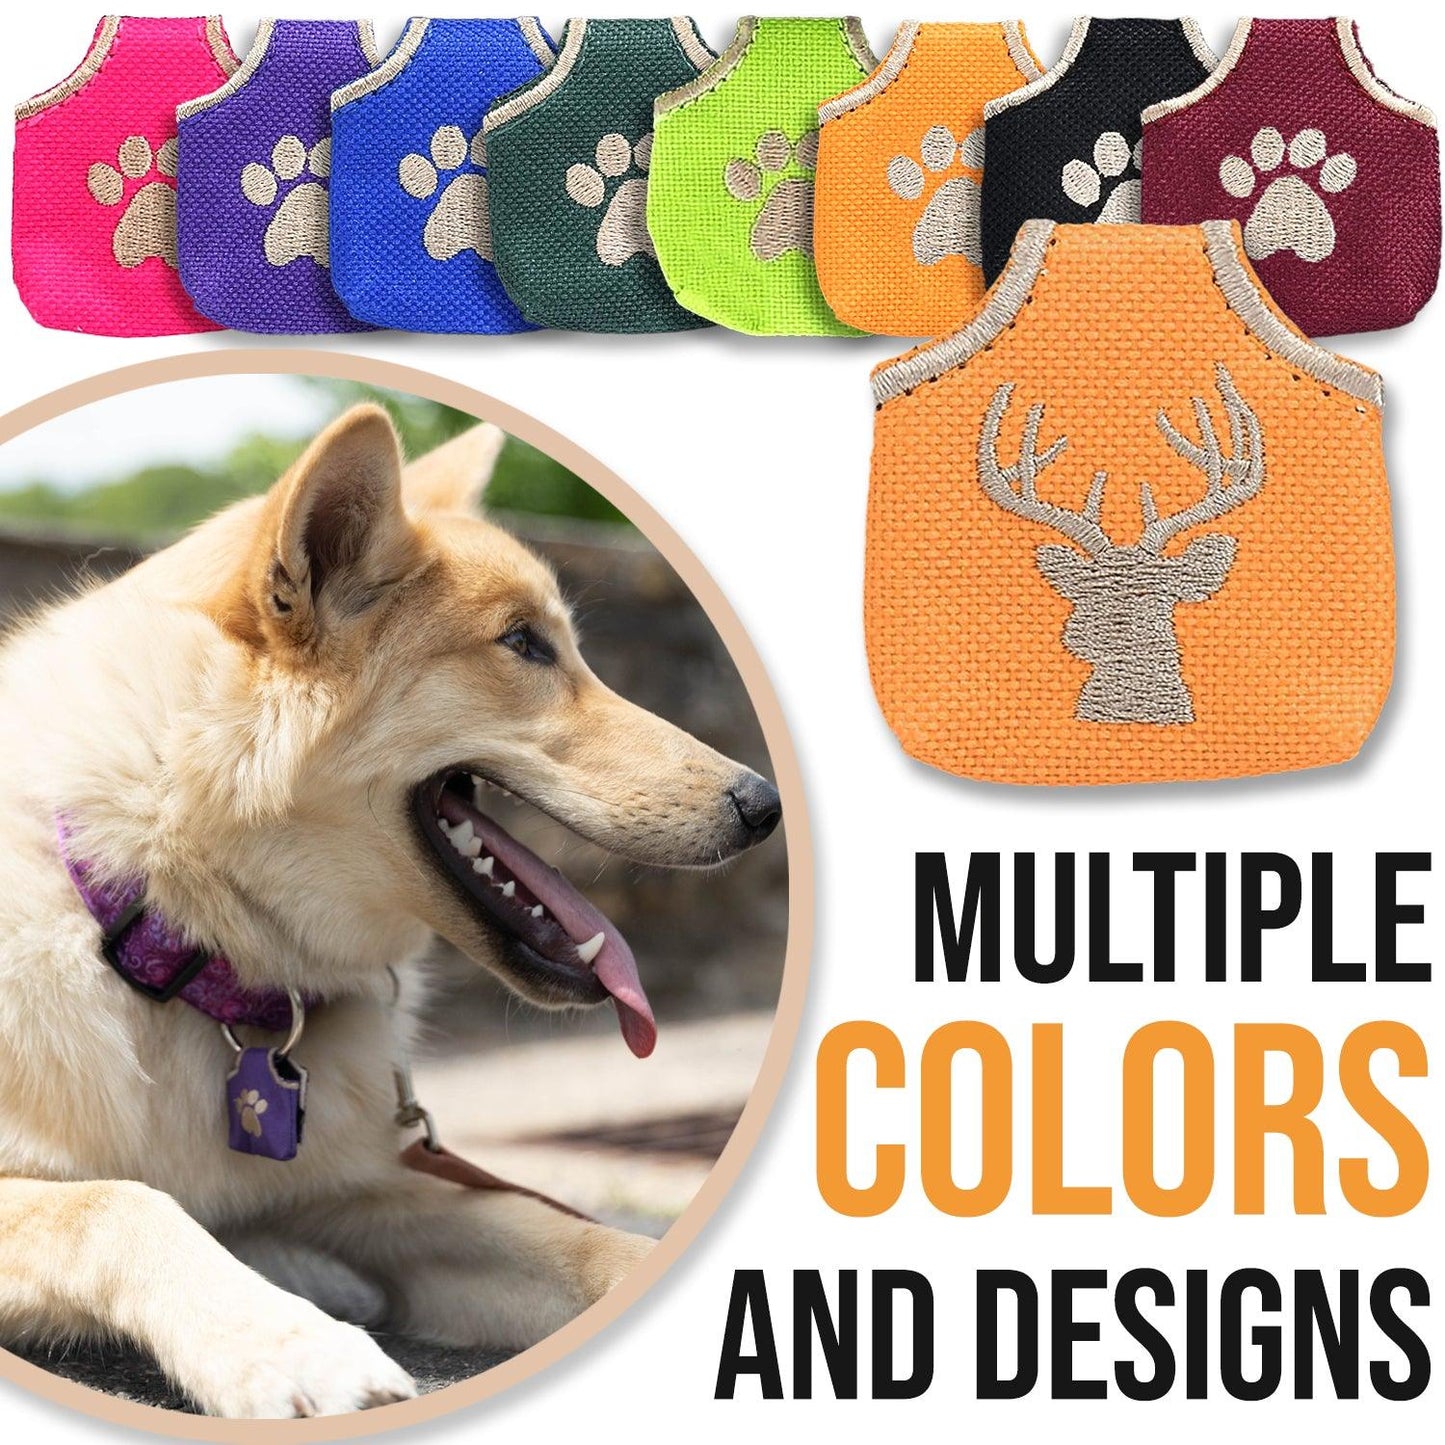 Dog tag covers in multiple colors